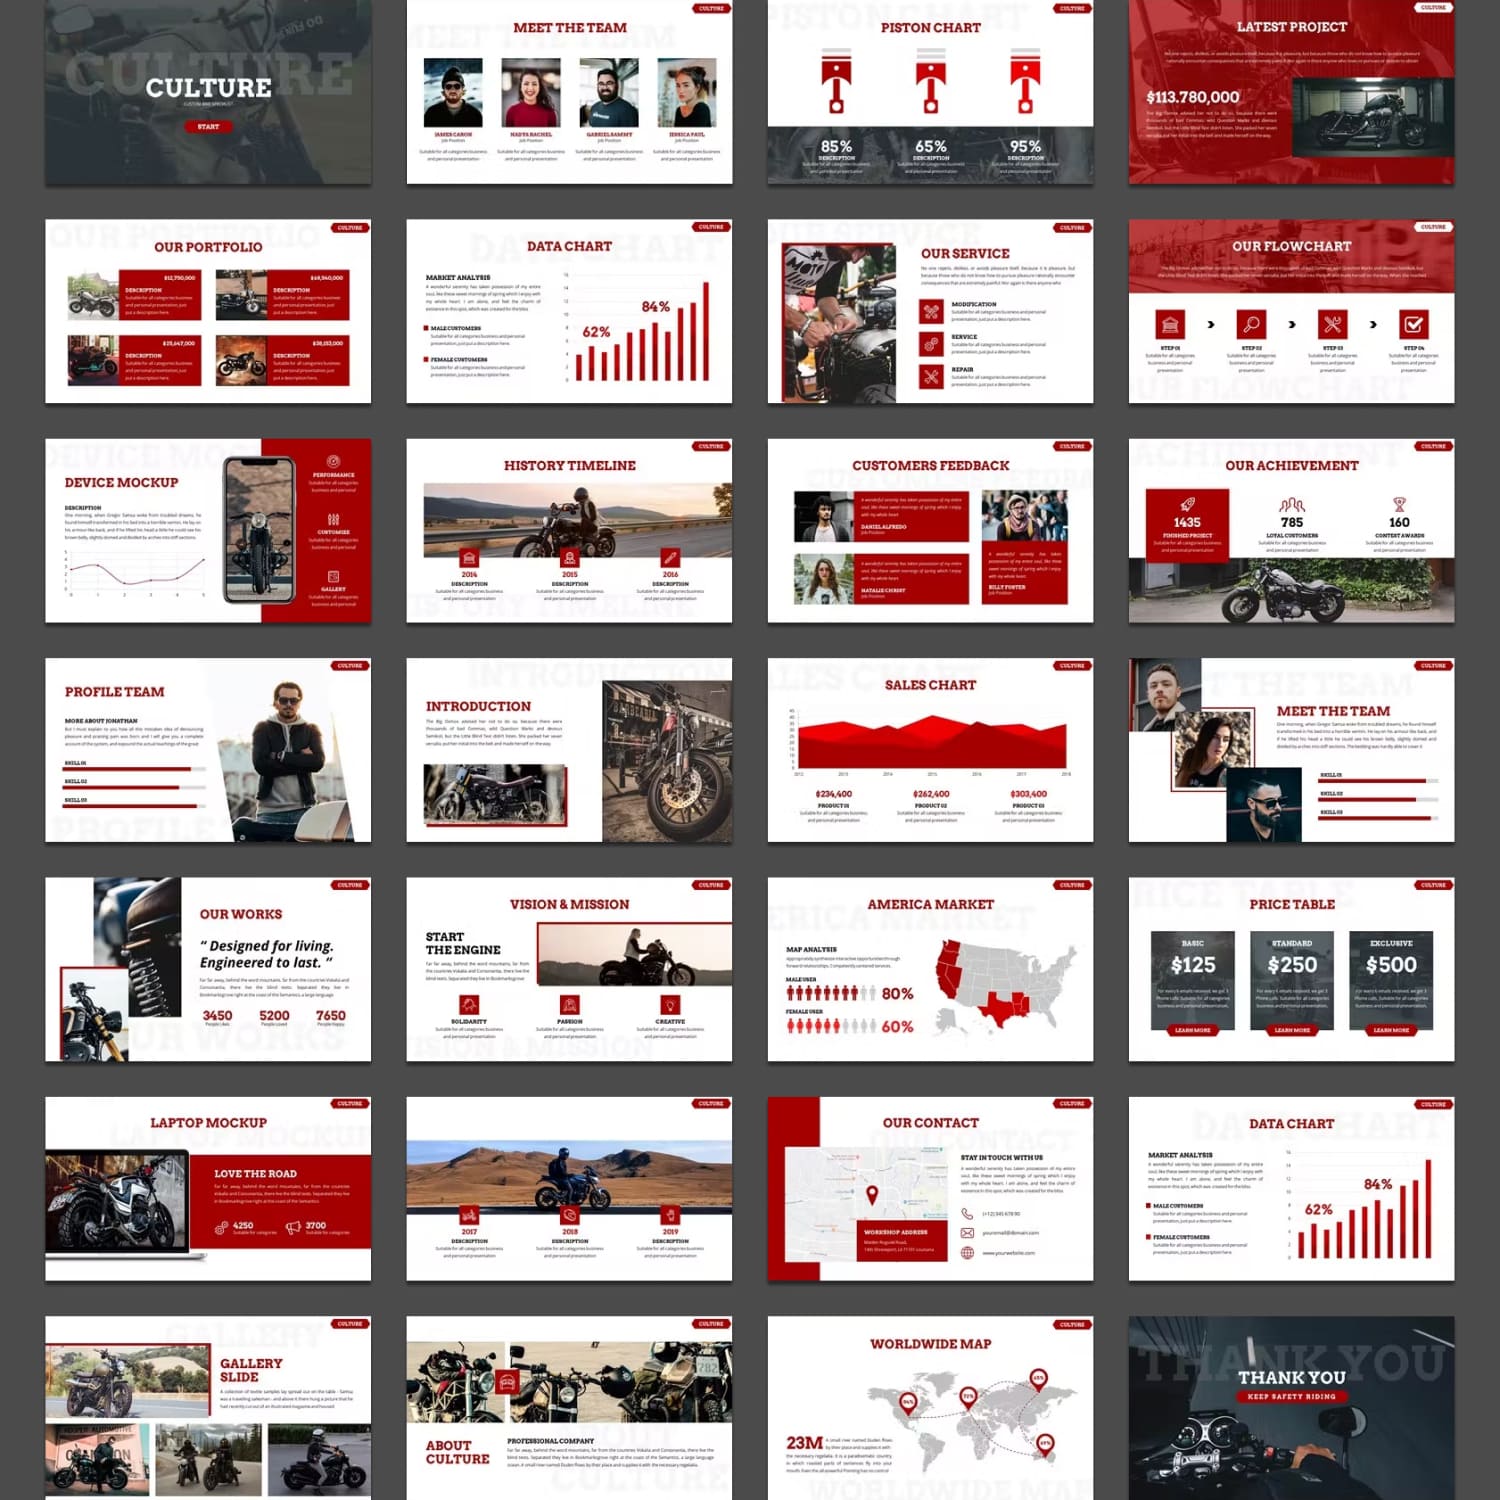 Culture bikers powerpoint template from SlideFactory.